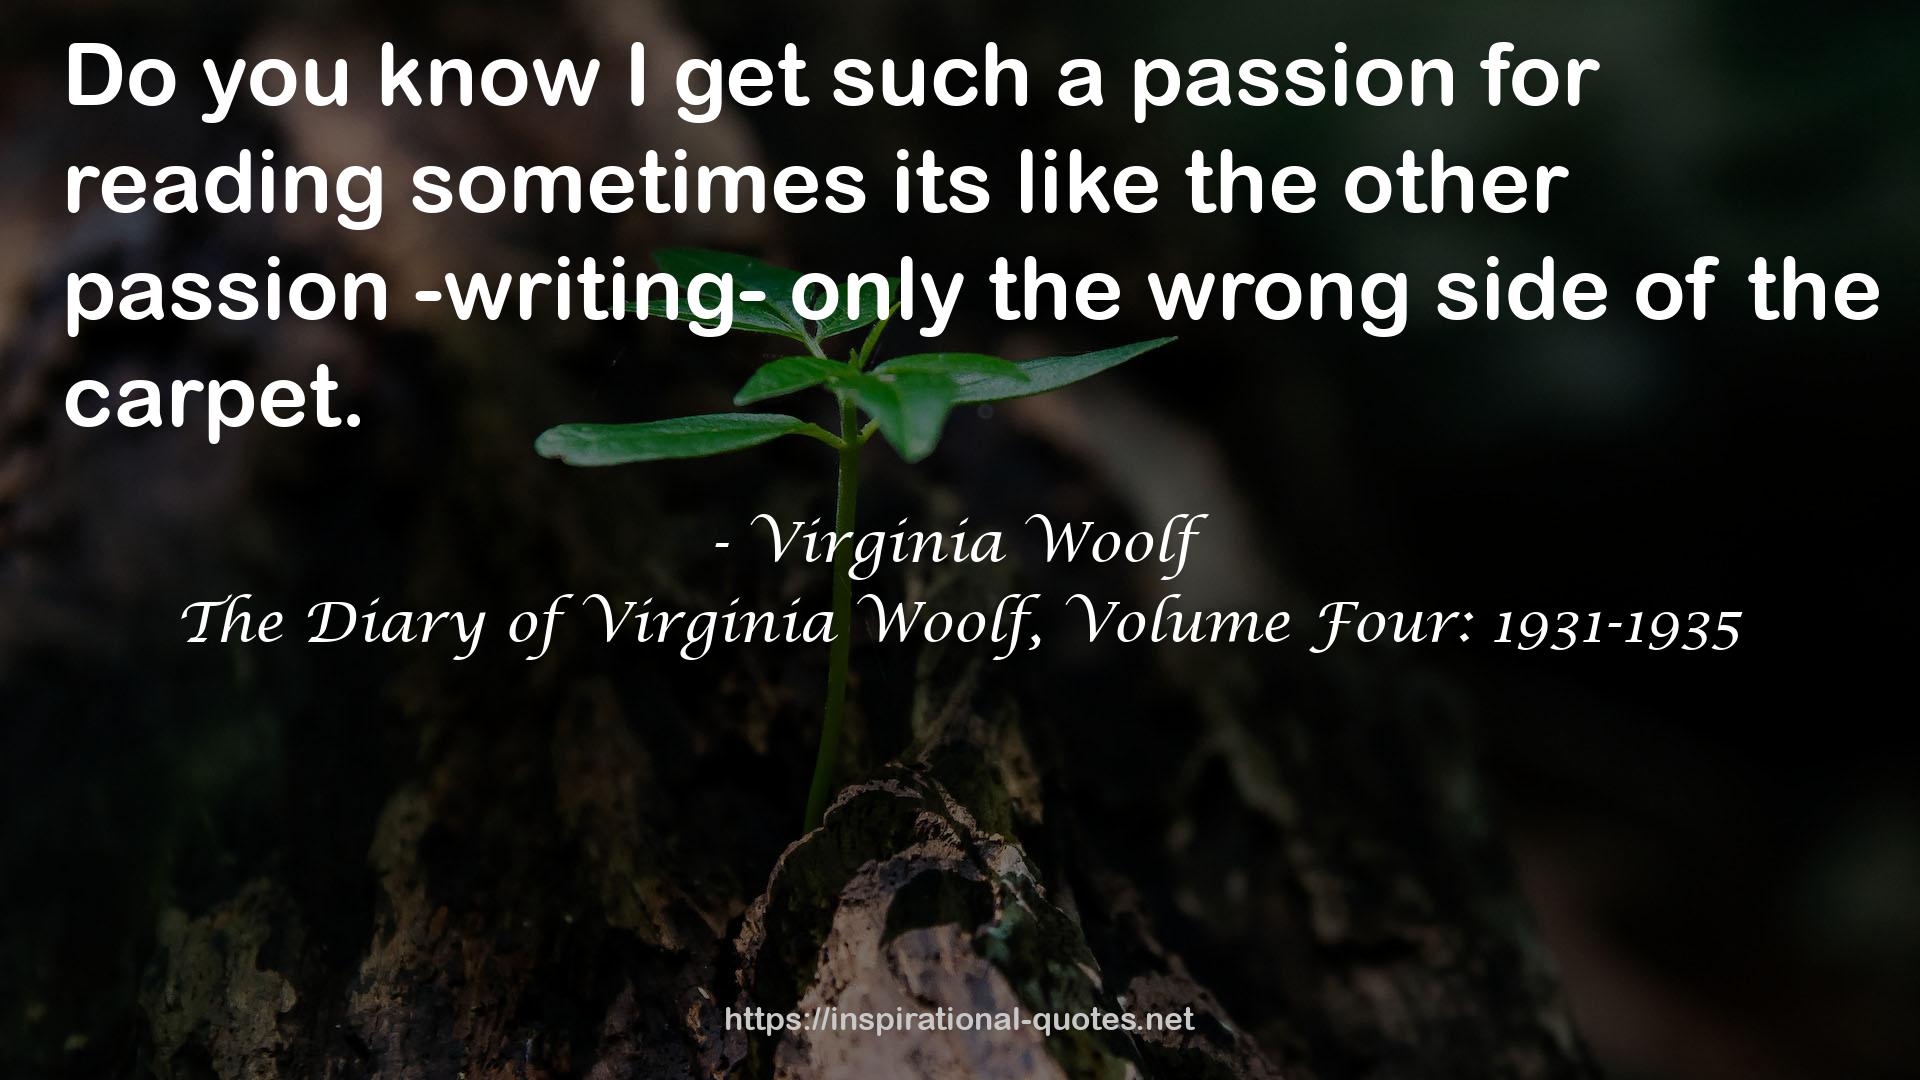 The Diary of Virginia Woolf, Volume Four: 1931-1935 QUOTES